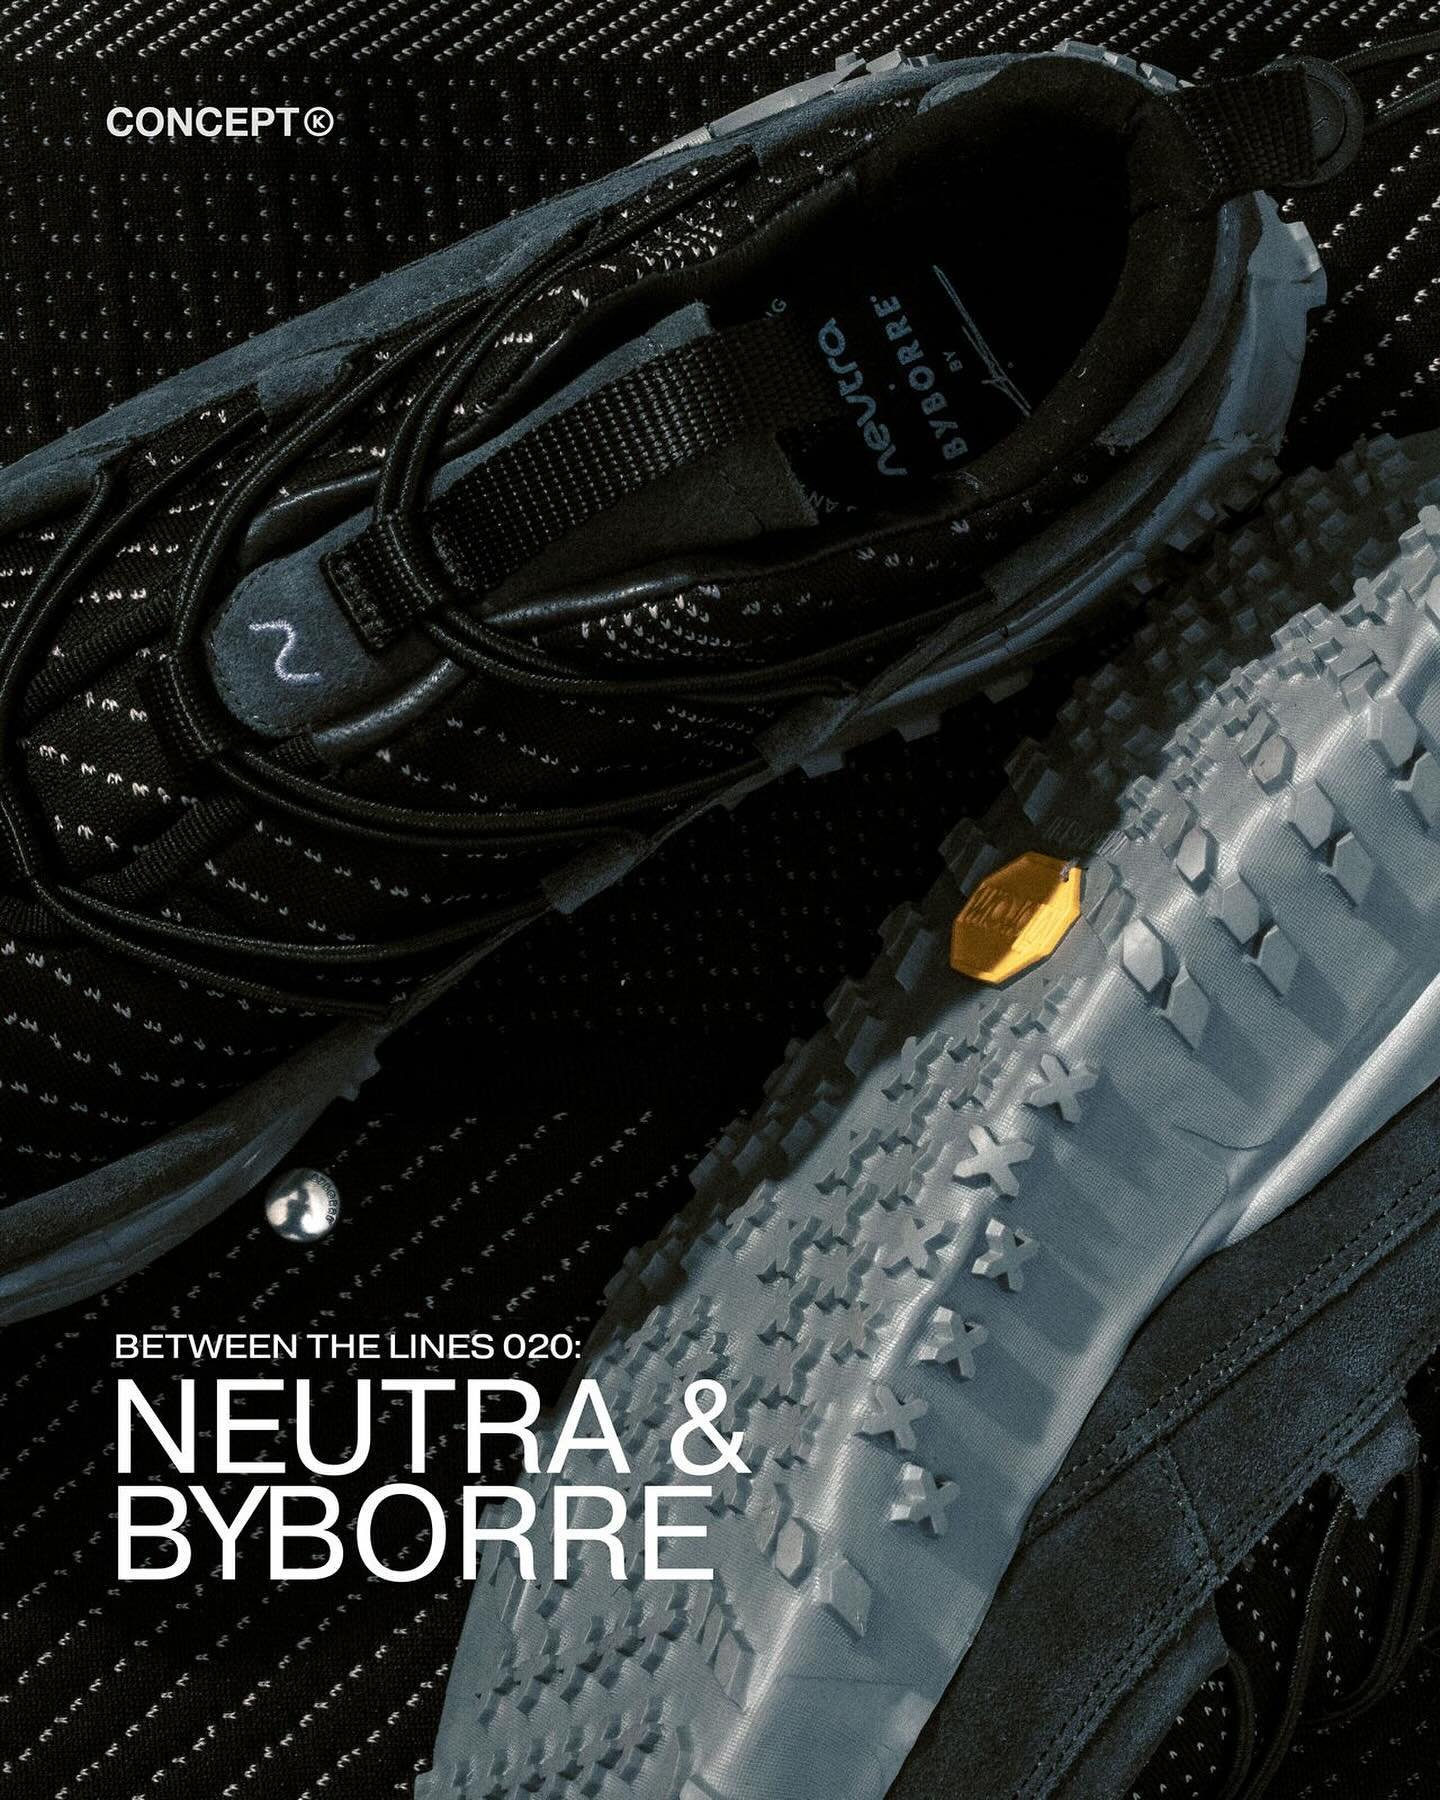 @Neutra have announced the second instalment of their collaborative journey with textile innovation studio @BYBORRE. Continuing to explore the power of bespoke and conscious textiles, this project sees Neutra step outside their traditional design lan